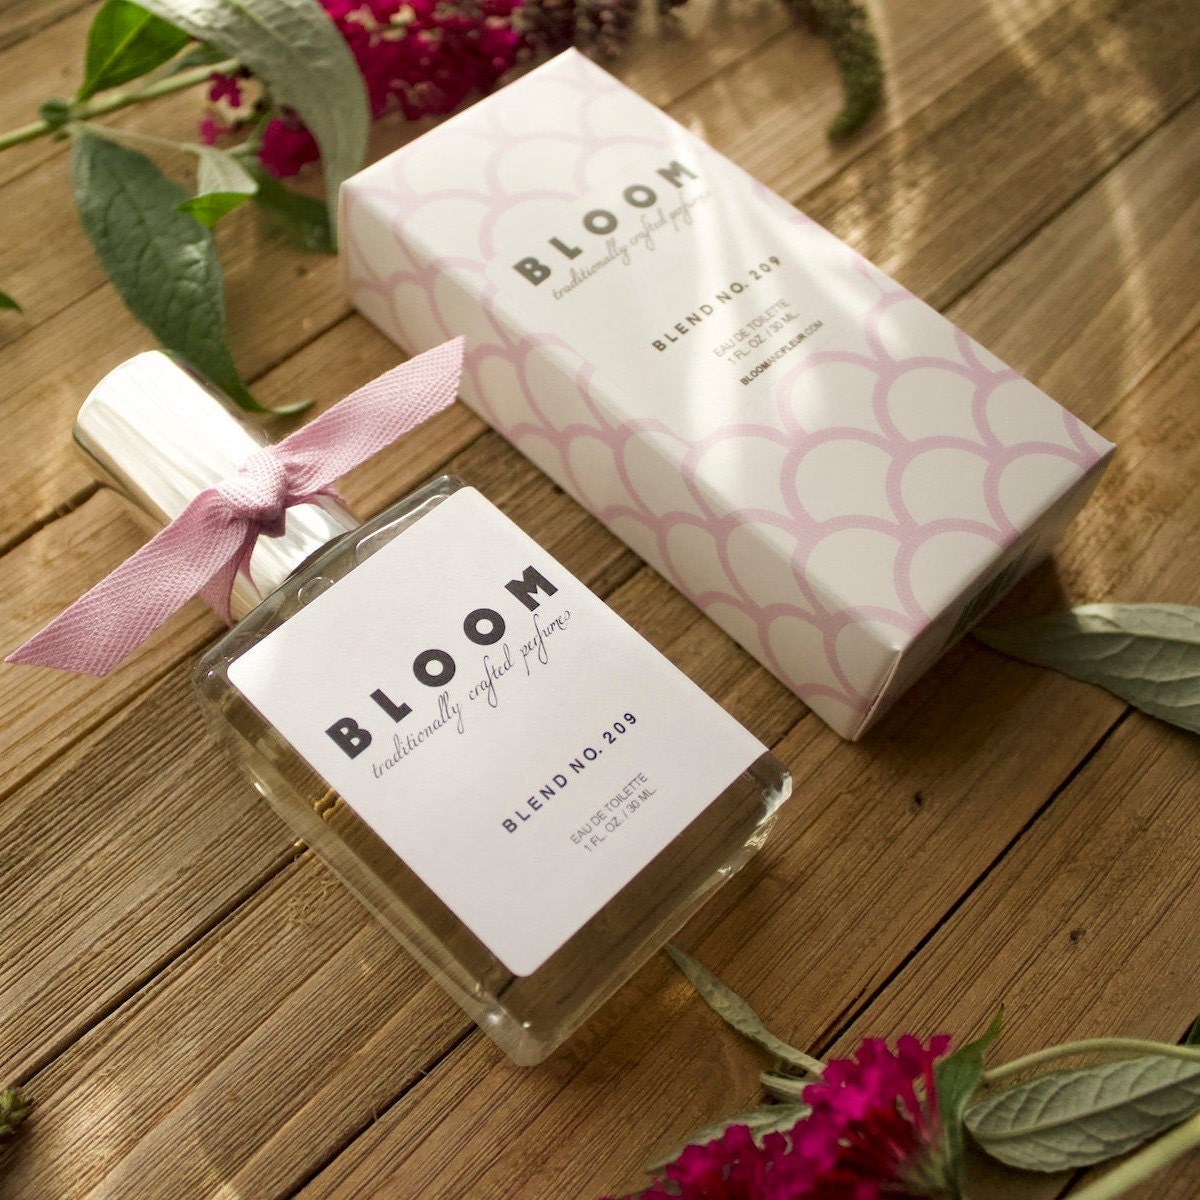 Back in Stock // Bloom Blend No. 209 Vanilla, Sandalwood, White Amber Best Selling Perfume, Mother's Day Gift Gifts For Her